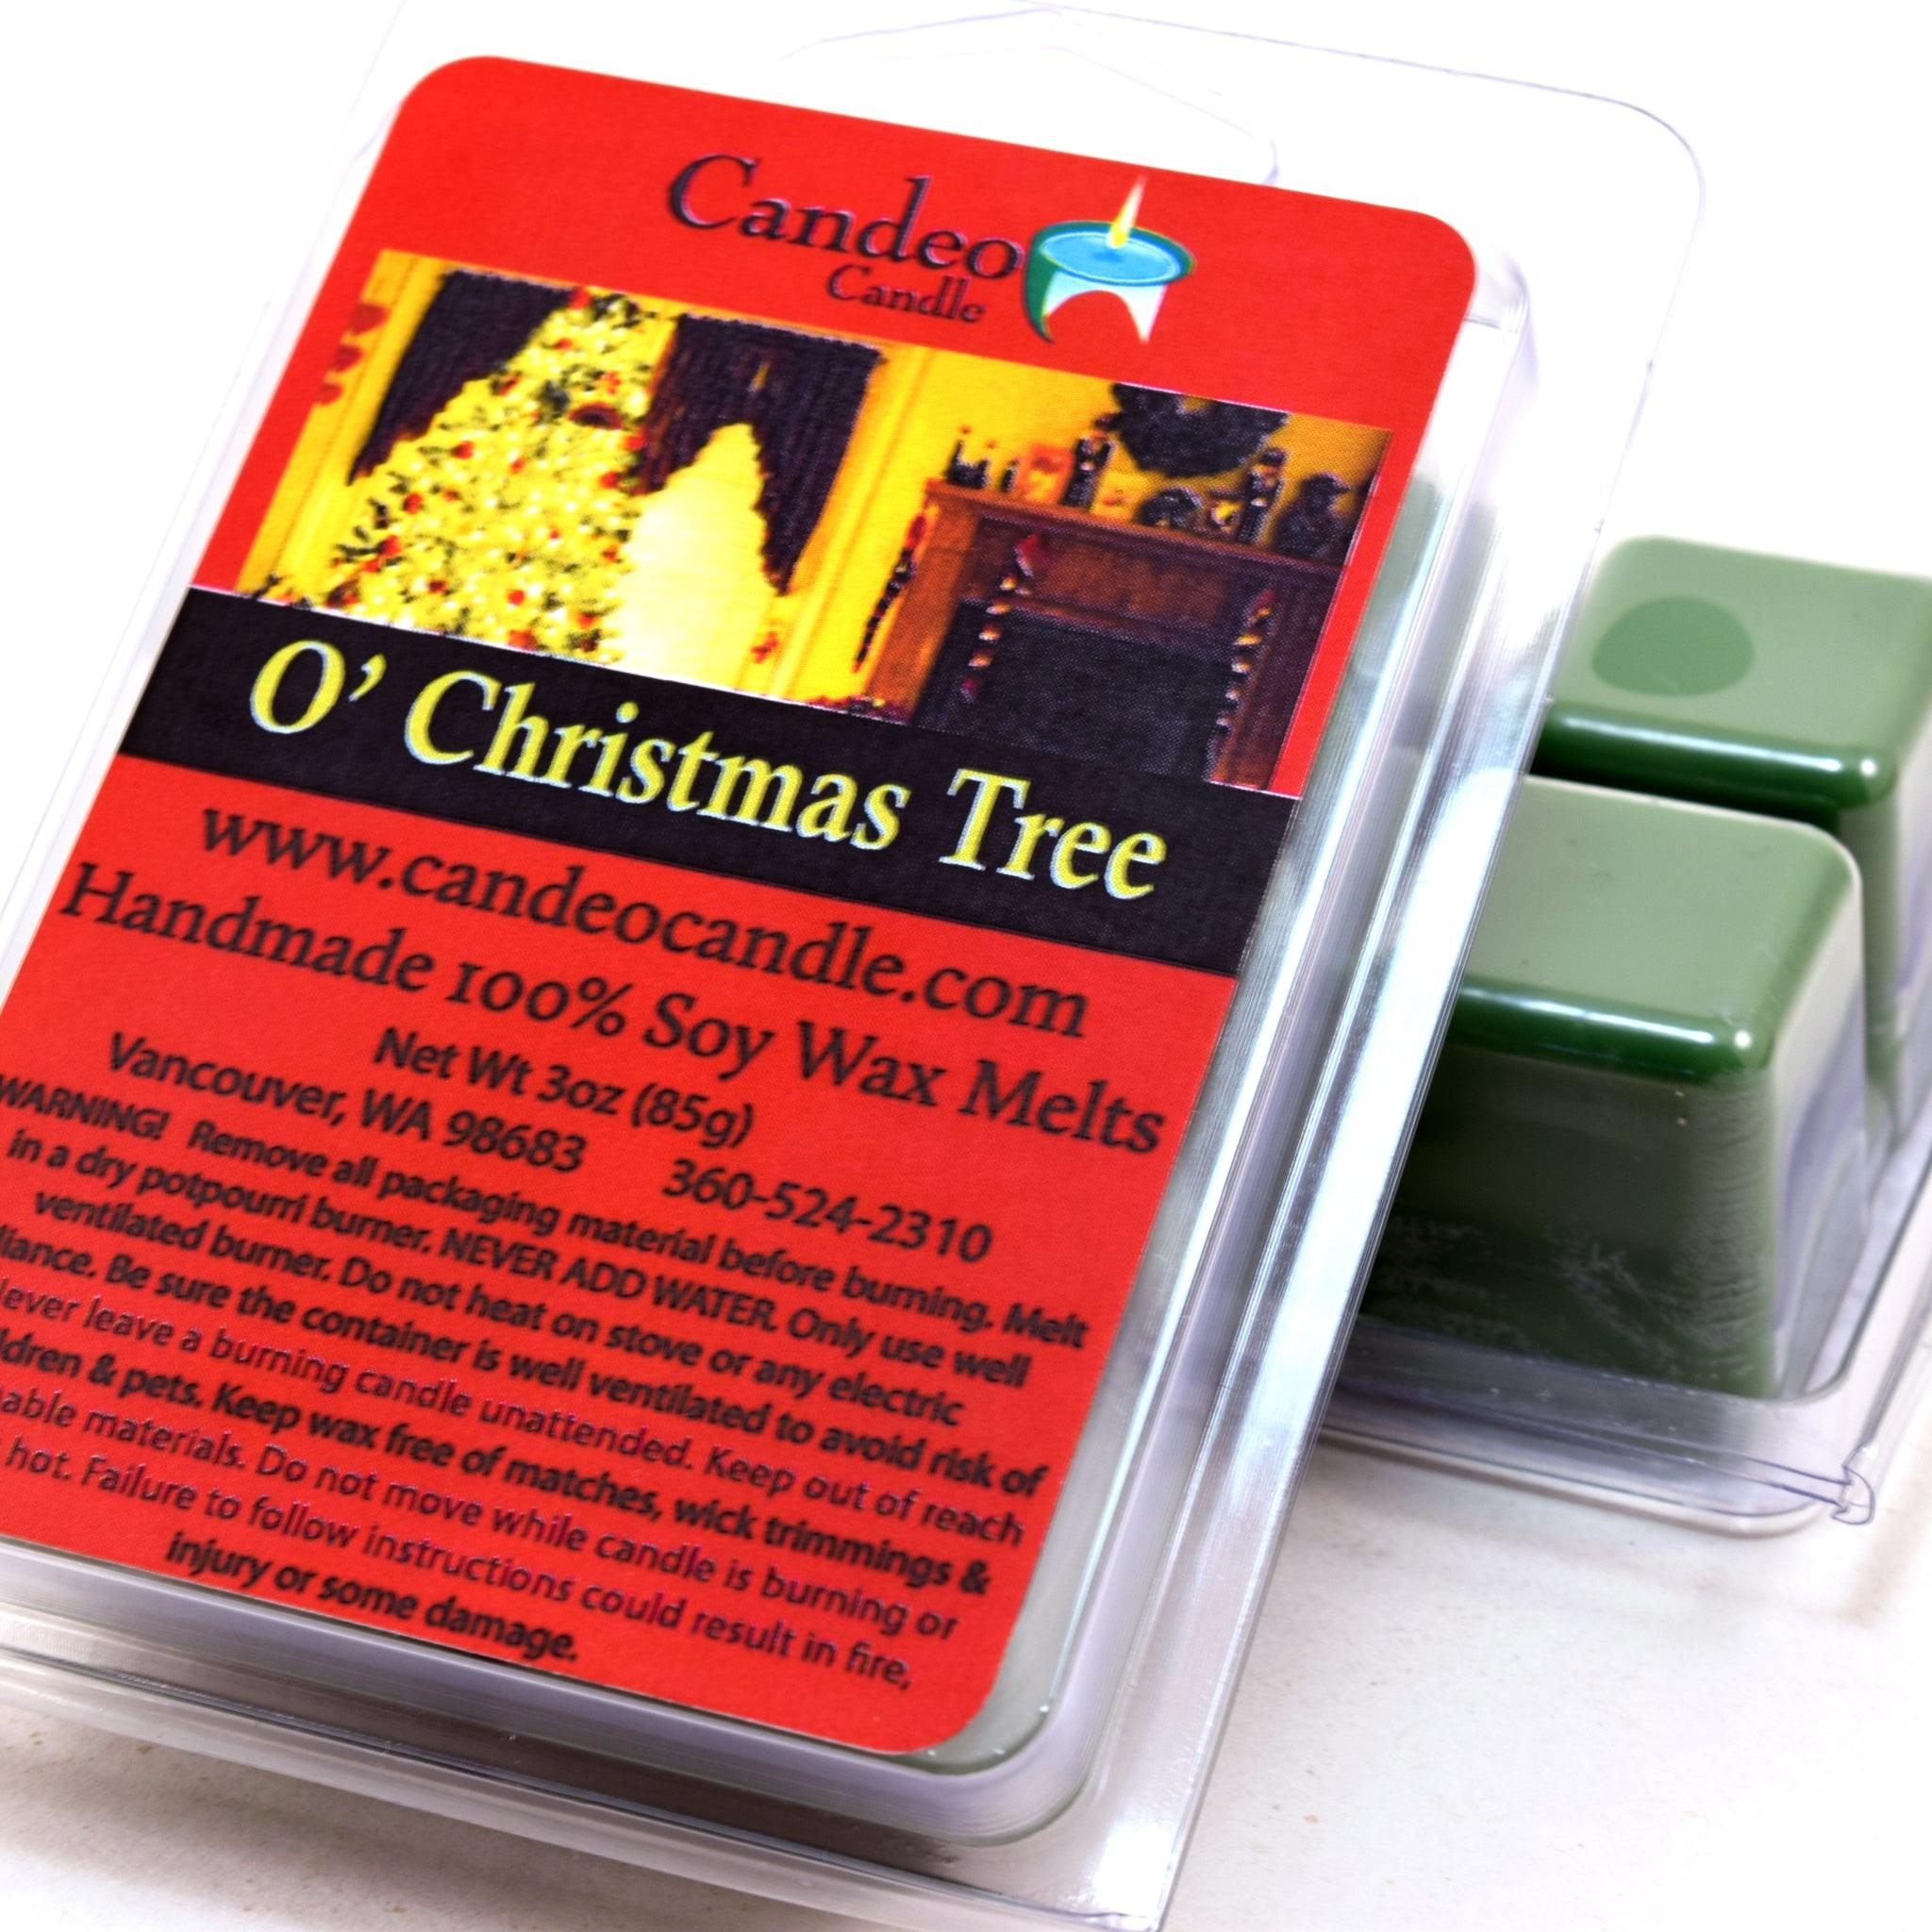 O' Christmas Tree, Soy Melt Cubes, 2-Pack - Candeo Candle